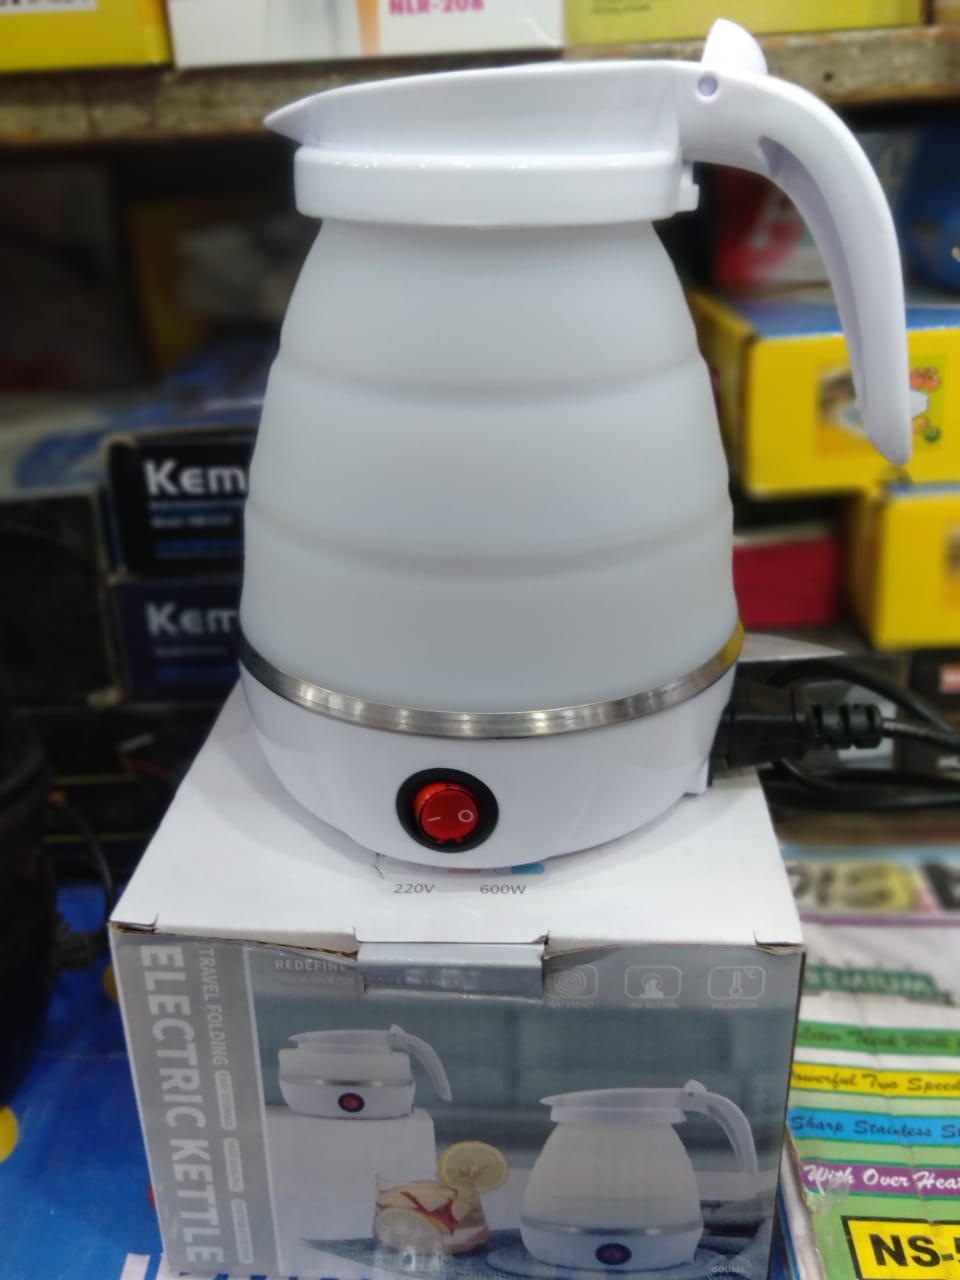 Portable Foldable Electric Kettle Traveling Kettle High Quality Imported Quality Strong Decorated Design Kitchen Home appliance Kettle Foldable Easy To Use - Smart Gadget